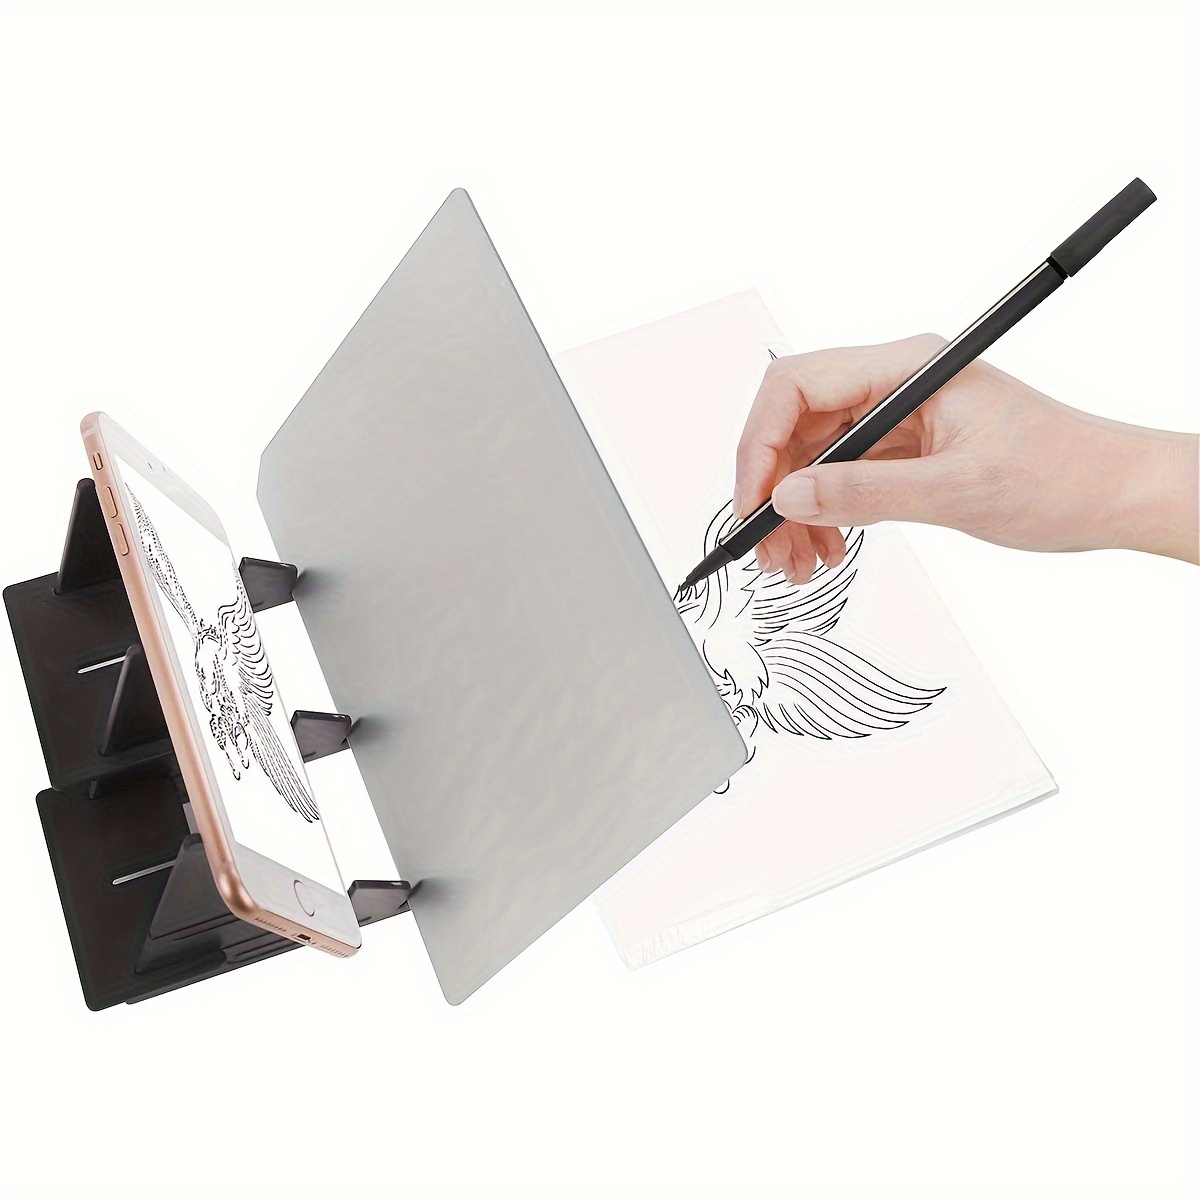 

1pc Optical Drawing Board, Portable Optical Tracing Board Image Drawing Board Tracing Drawing Projector Optical Painting Board Sketching Tool For Beginners, Artists, Etc